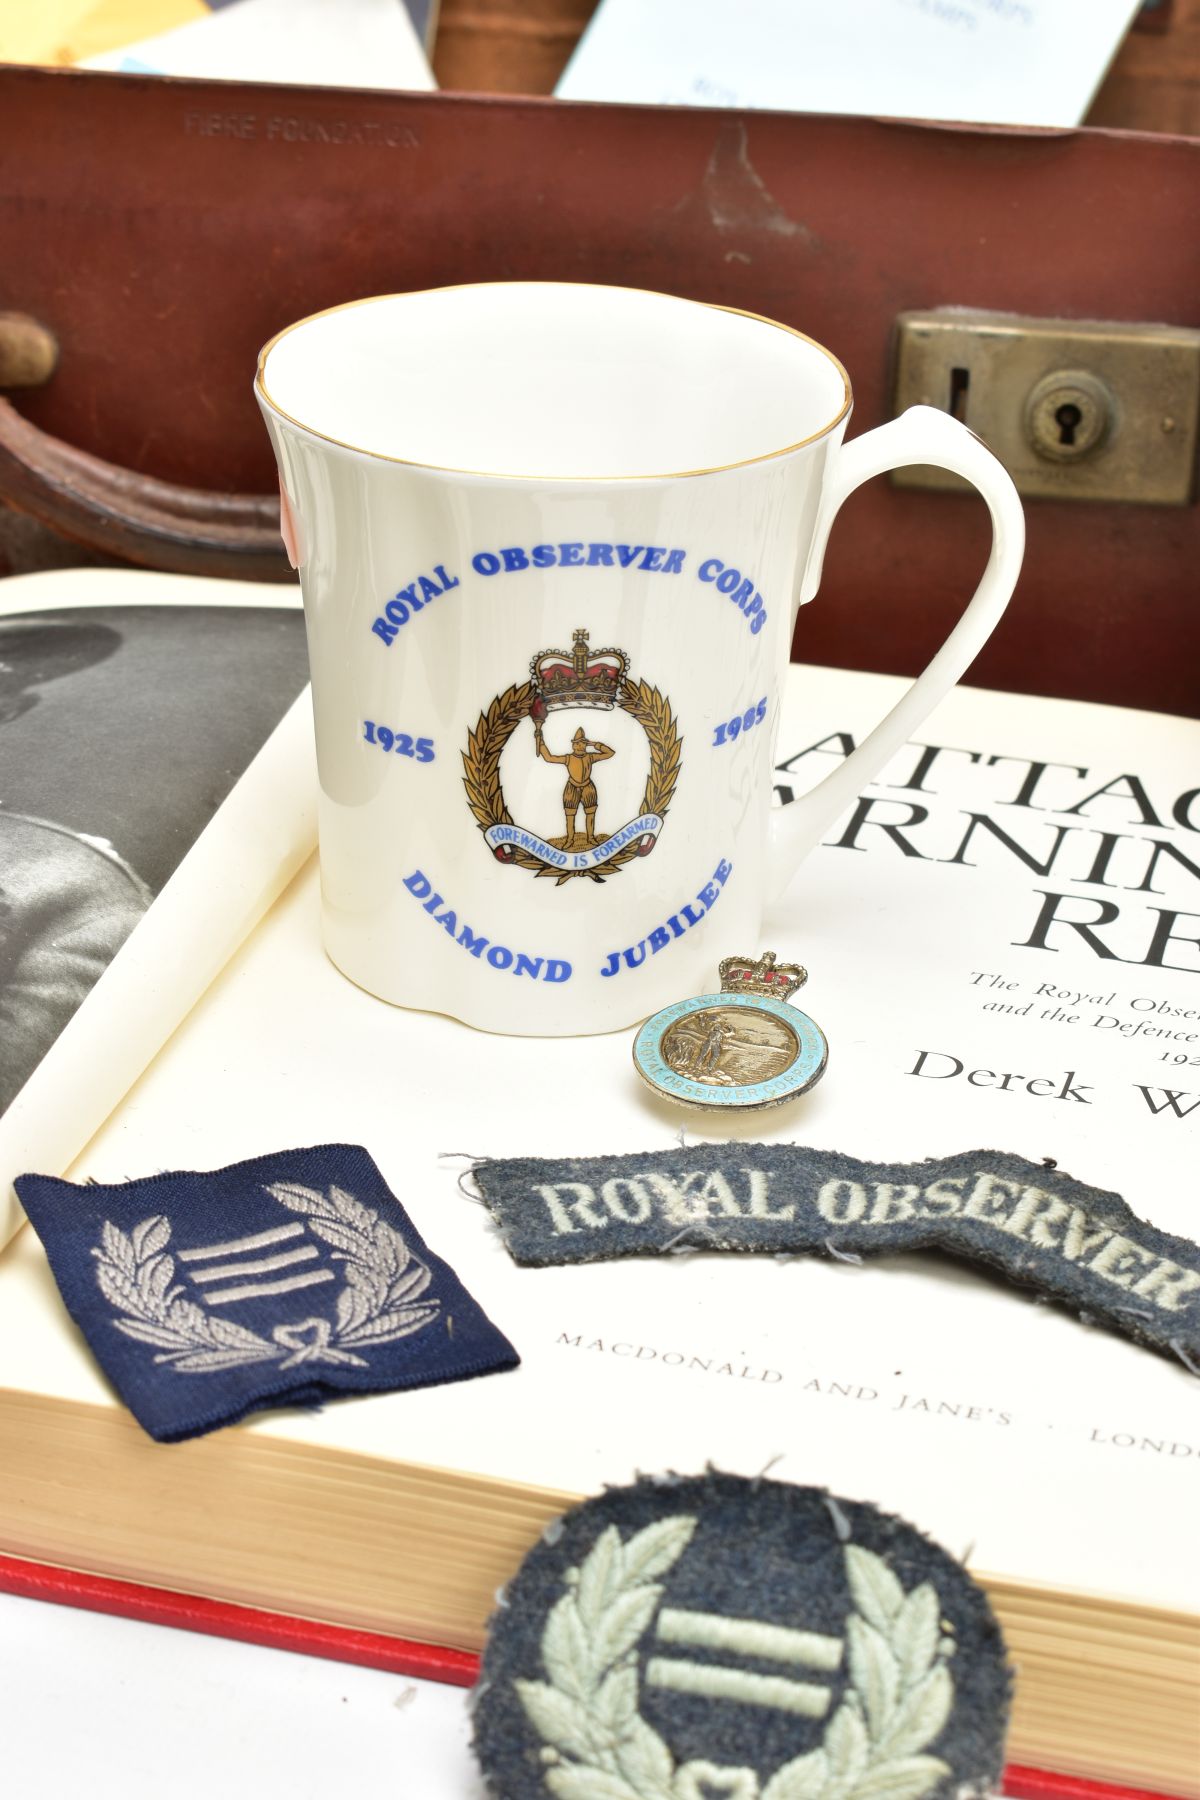 A SMALL SUITCASE CONTAINING AN ARCHIVE OF ROYAL OBSERVER CORPS ITEMS, attributed to Obs R.FOLLOWS - Image 2 of 9